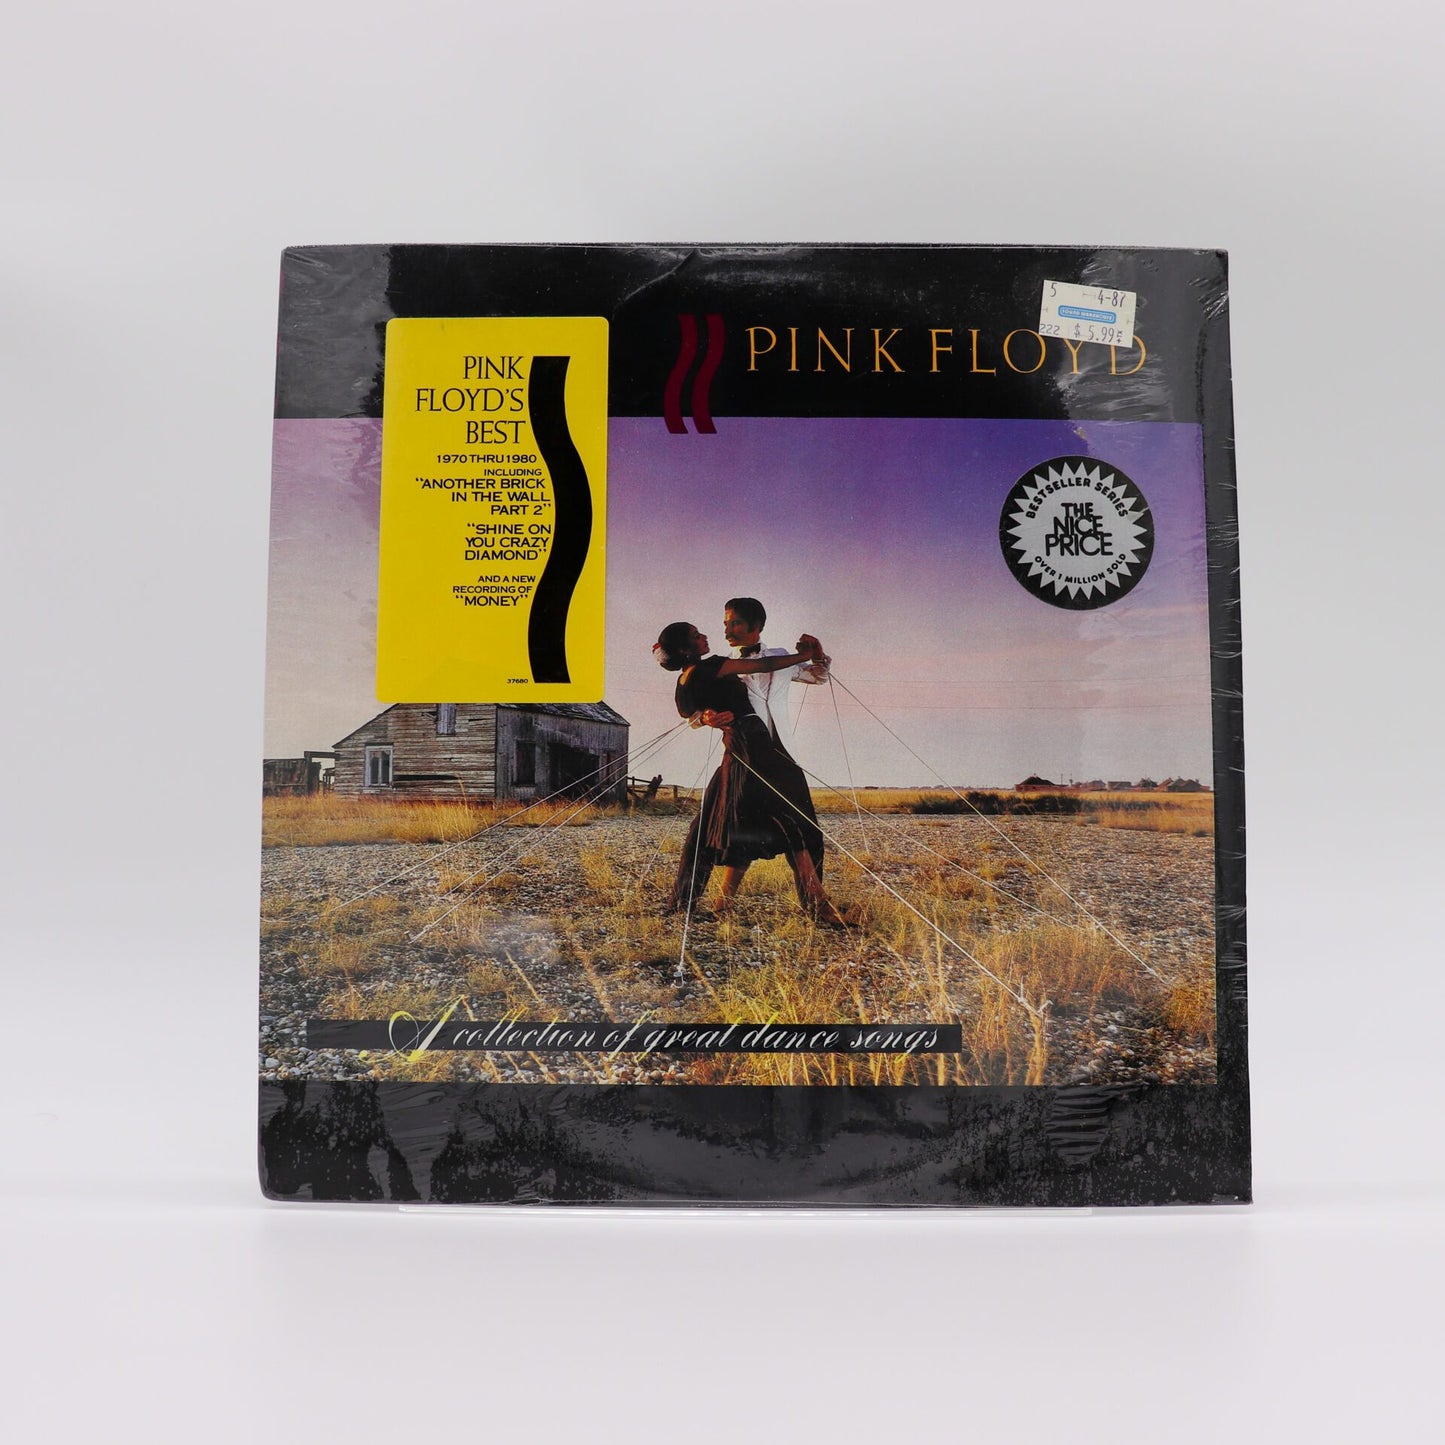 Original, Sealed Pink Floyd’s Best, 1970 thru 1980: A Collection of Dance Songs